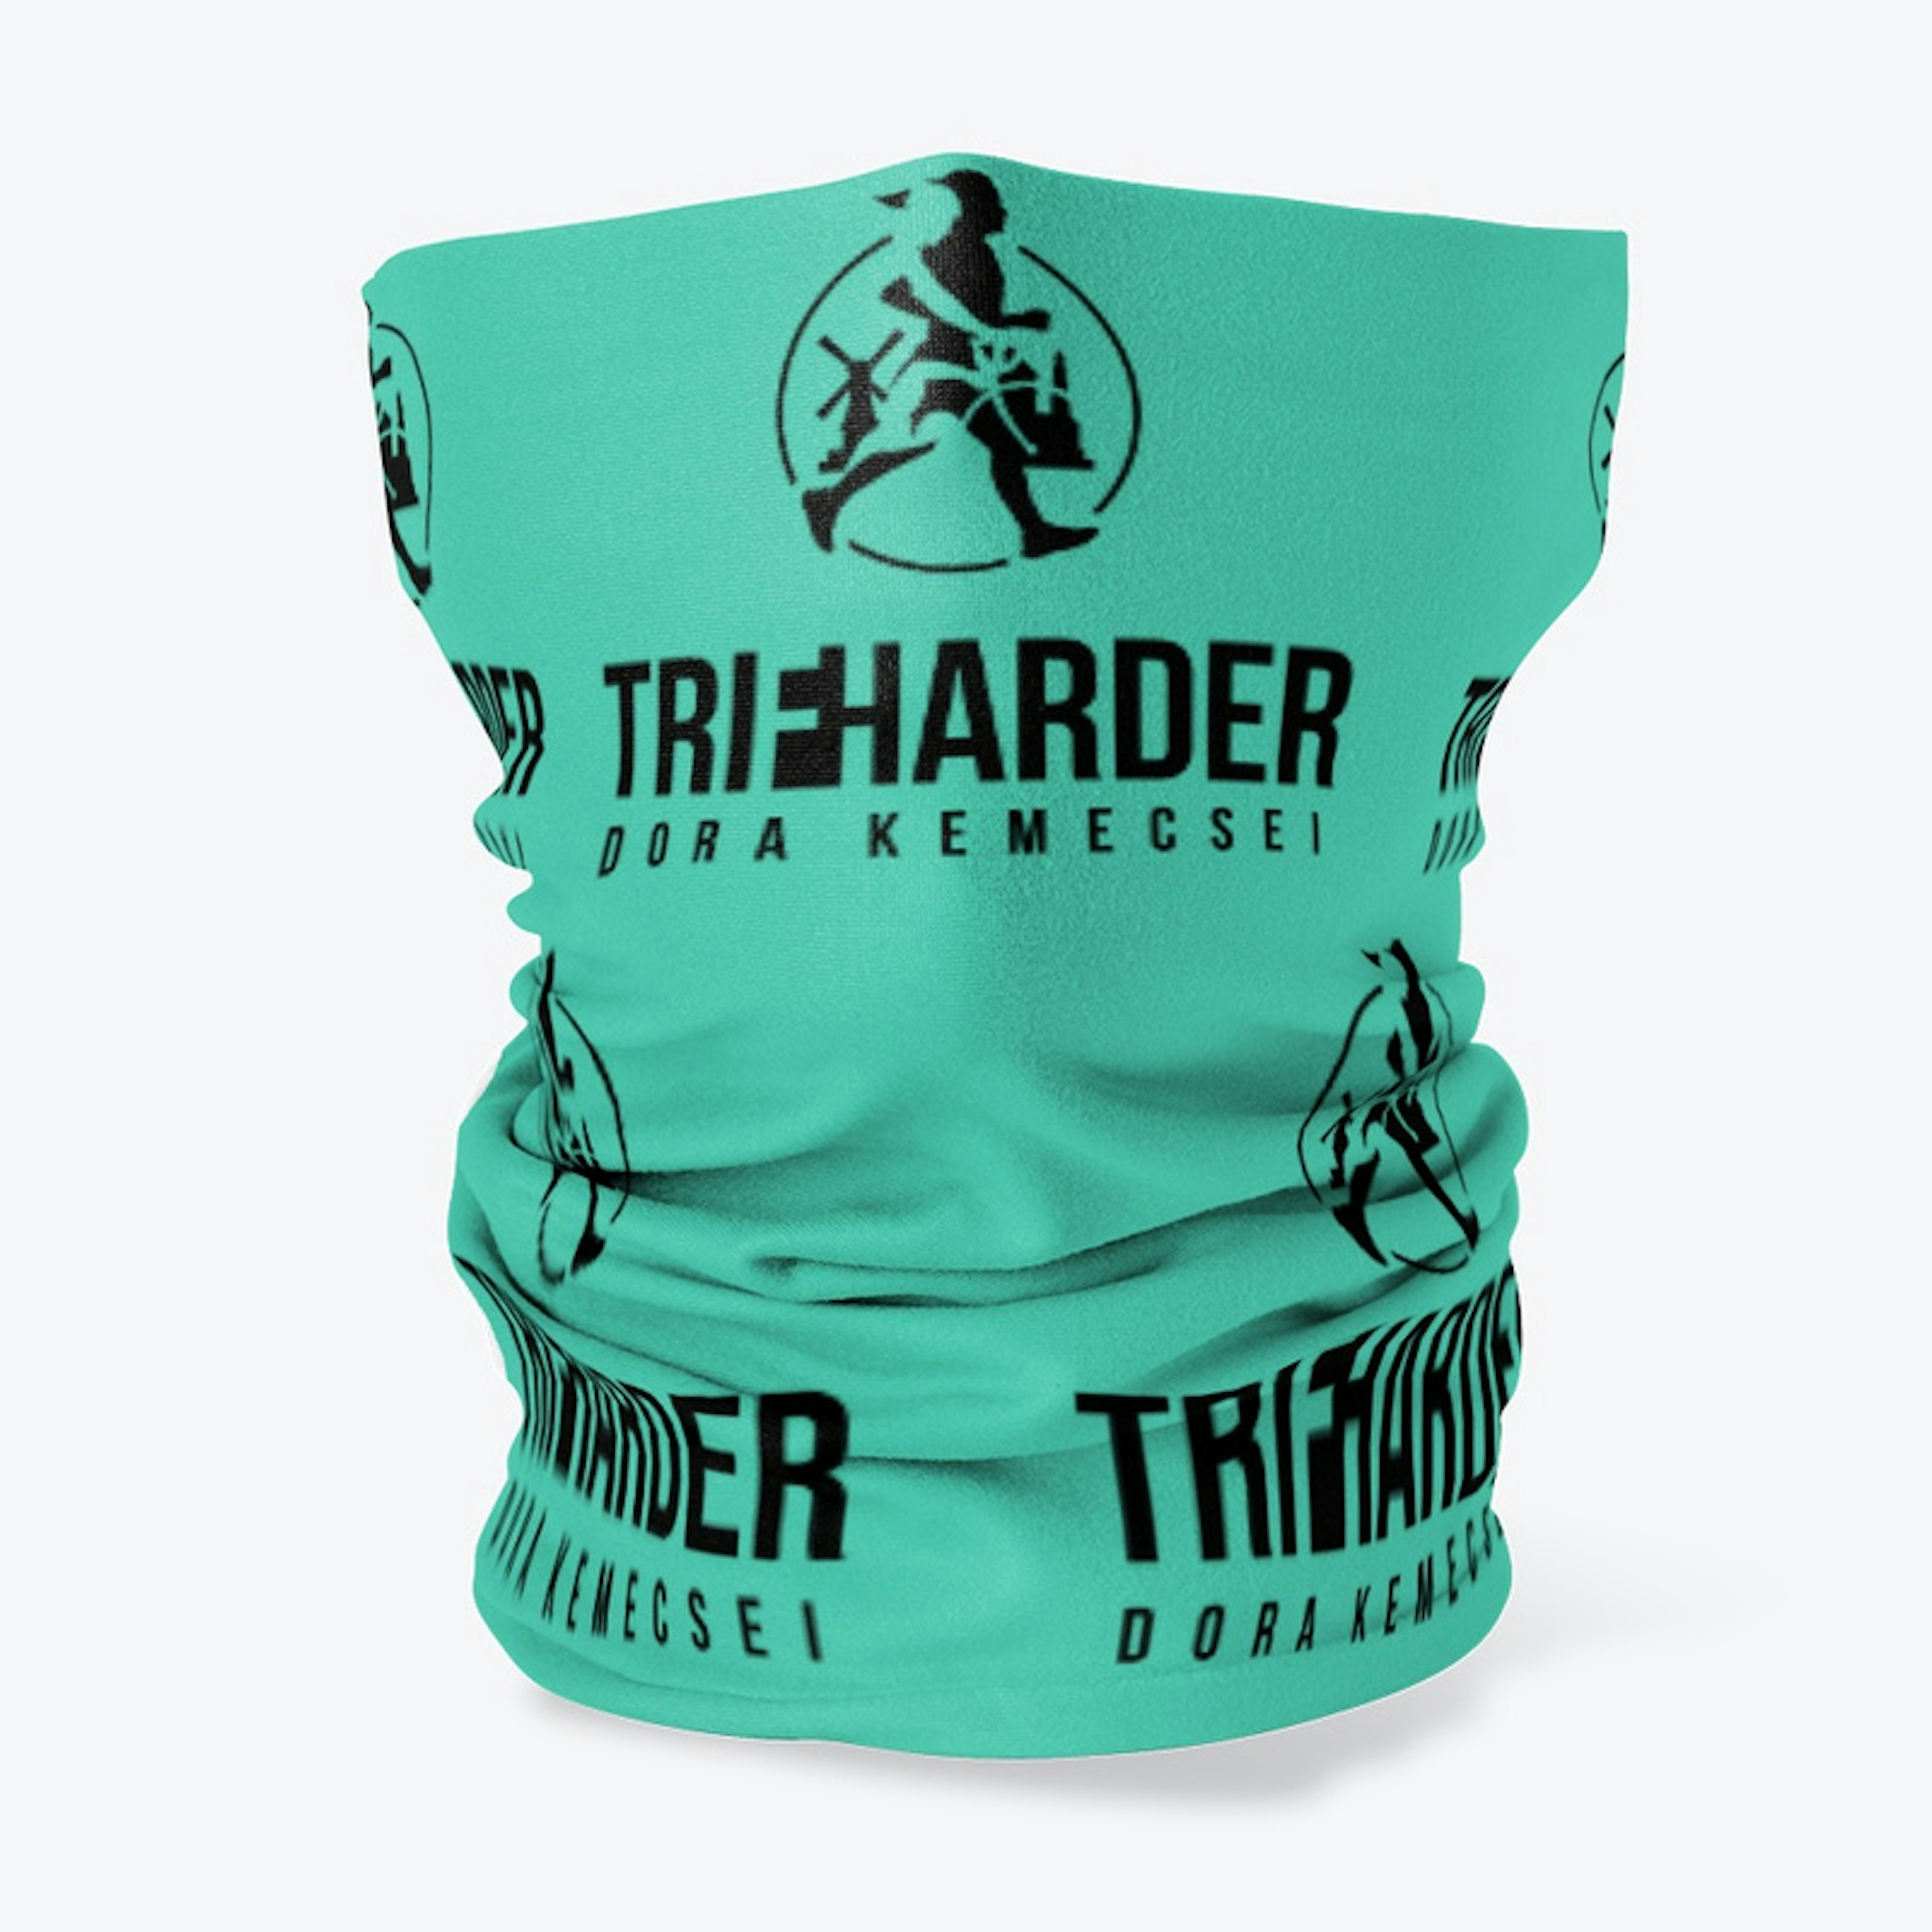 Trifharder bold with black! 